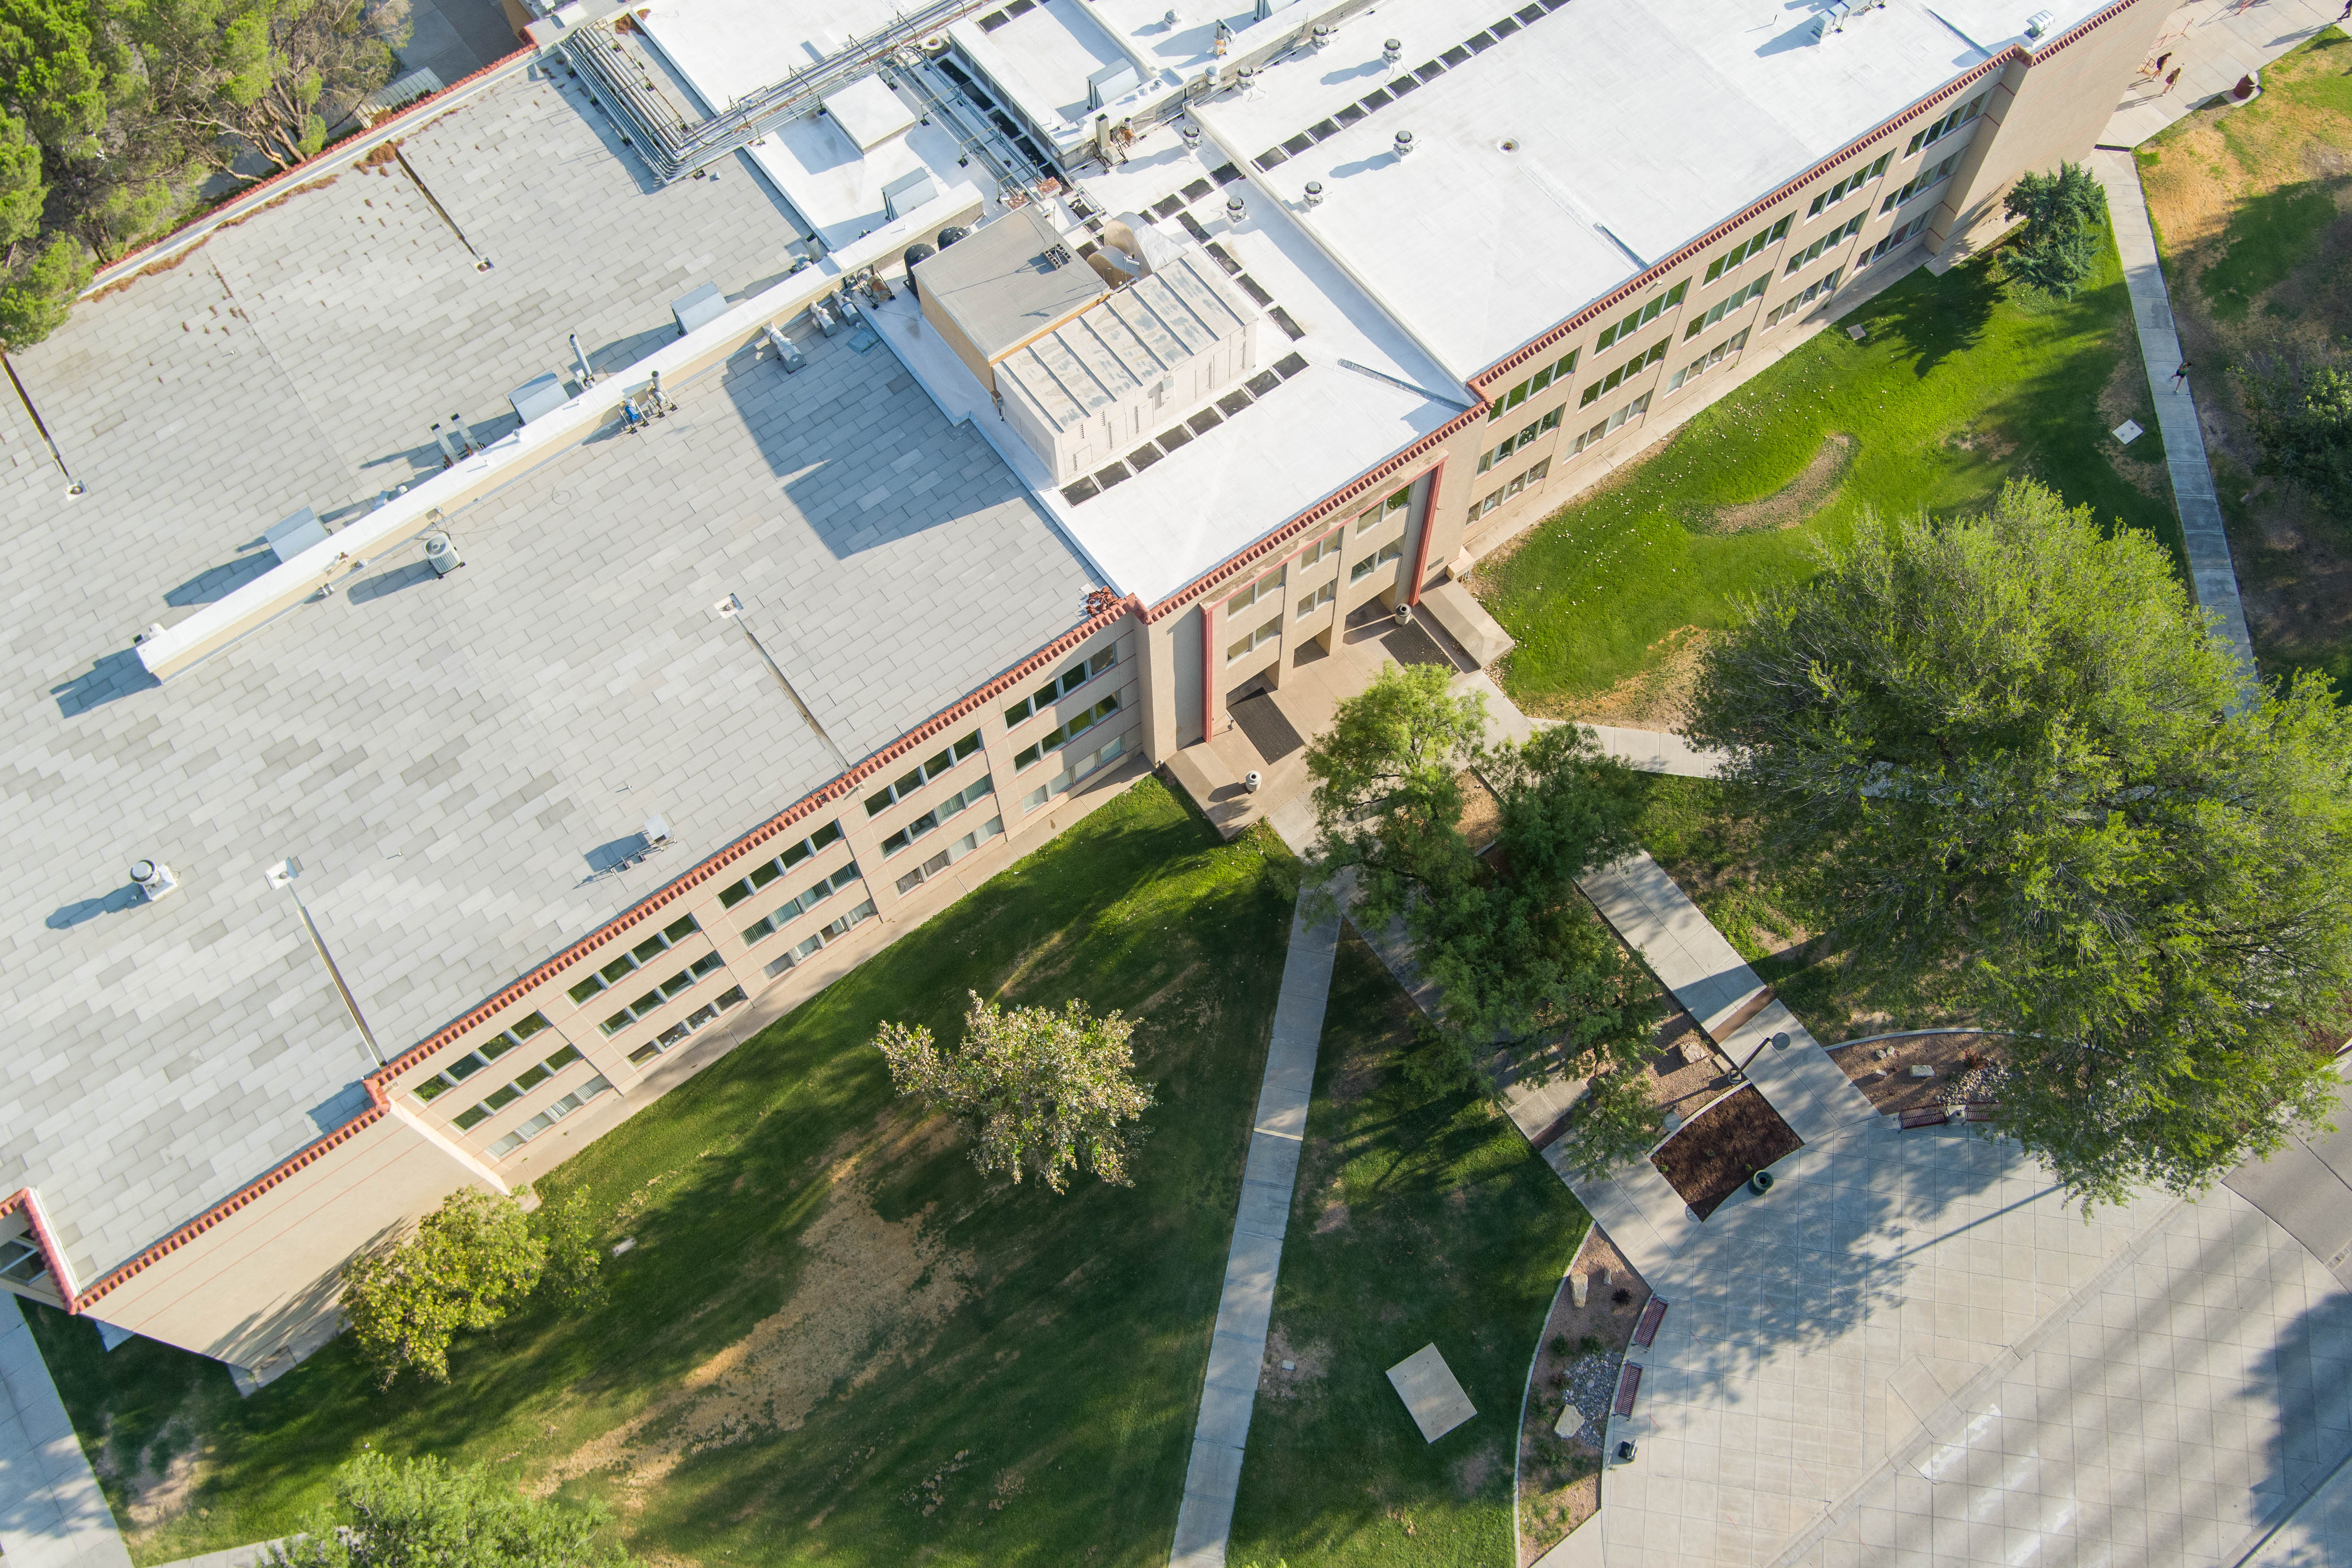 Ariel photo of the College of ACES building - Gerald Thomas Hall. 